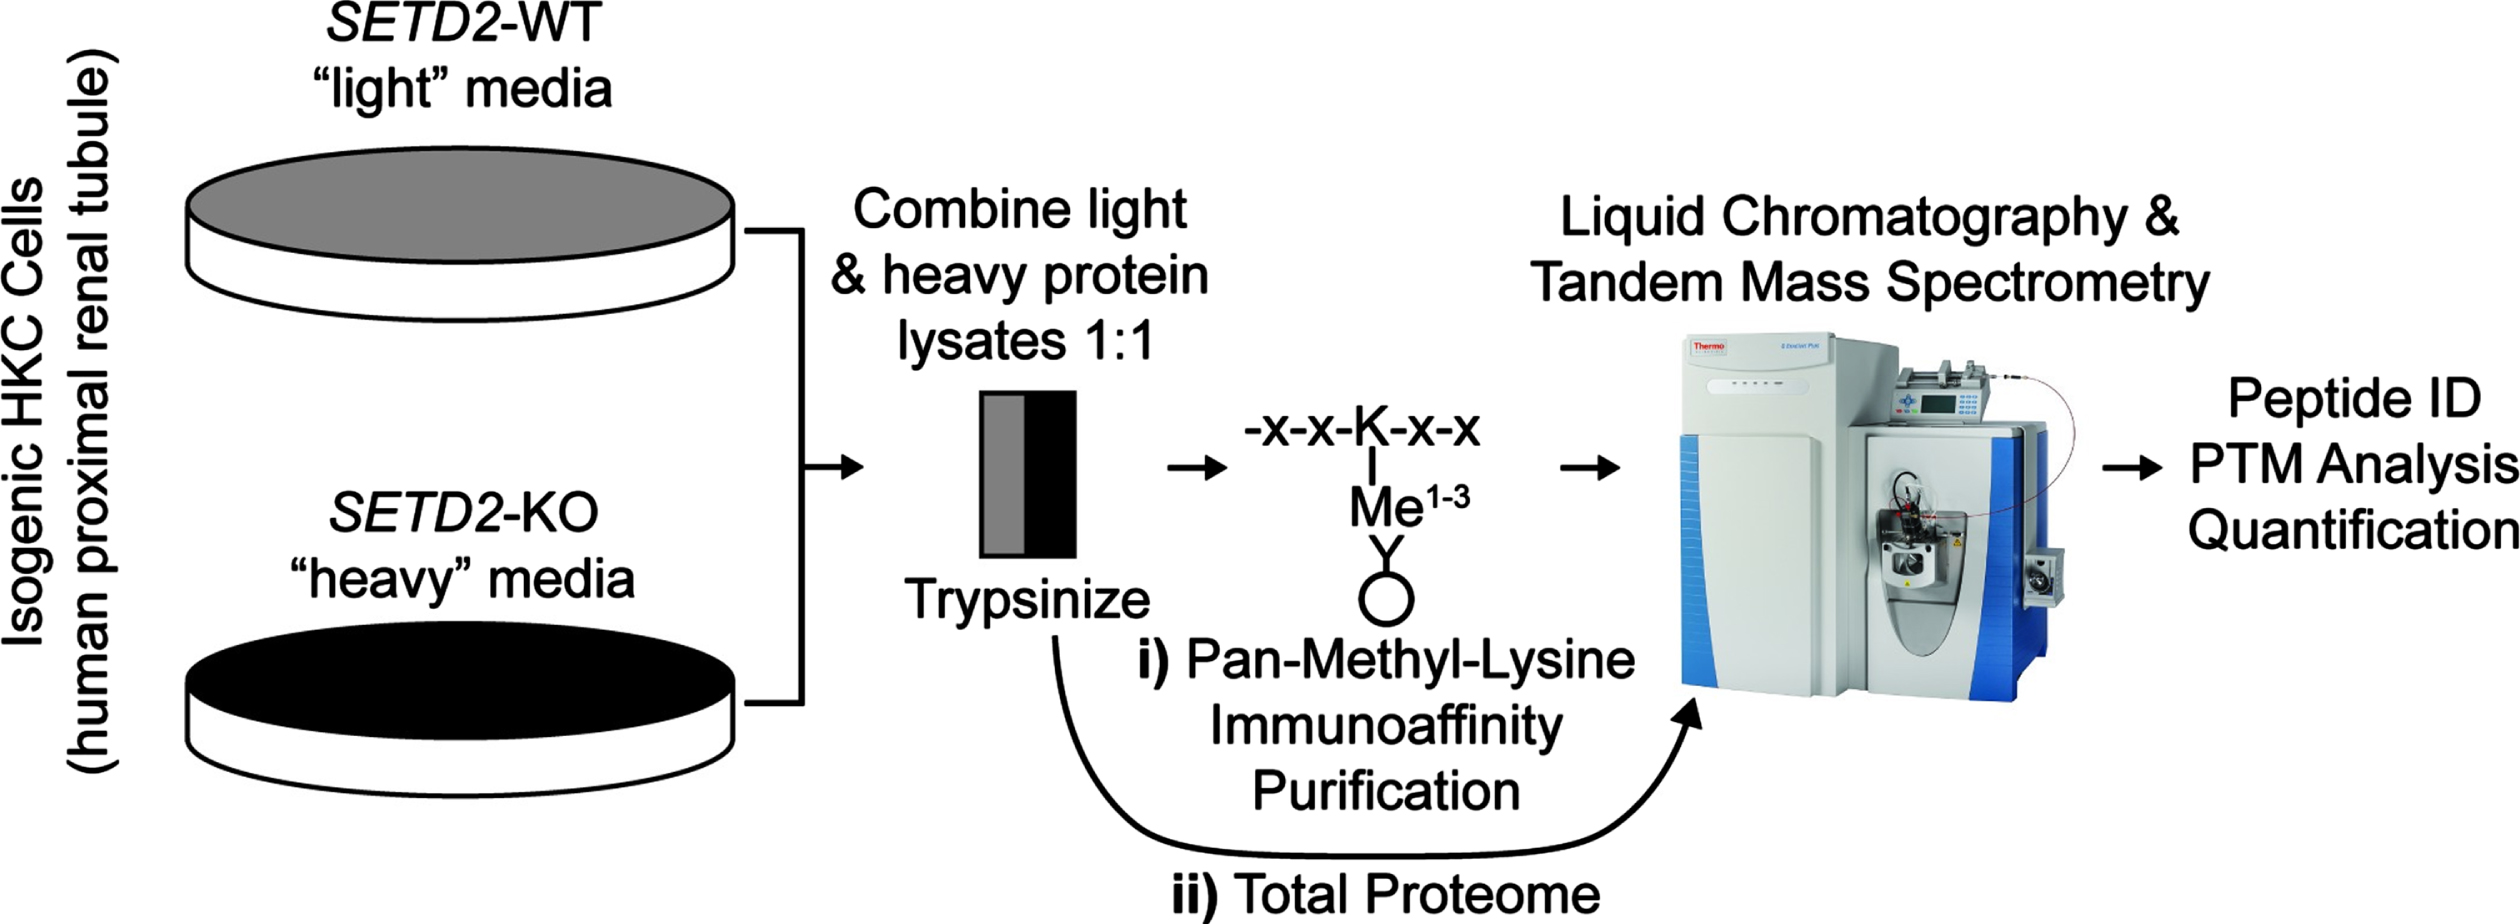 Workflow for the identification and quantification of peptides in wild type and SETD2-knock out human kidney cell lines. Above is the workflow for i) lysine methylated (lysine methylome) and ii) all peptides (total proteome). WT = wild type; KO = knock out. X = any amino acid; K = lysine. ID = identification. PTM = post-translational modification.